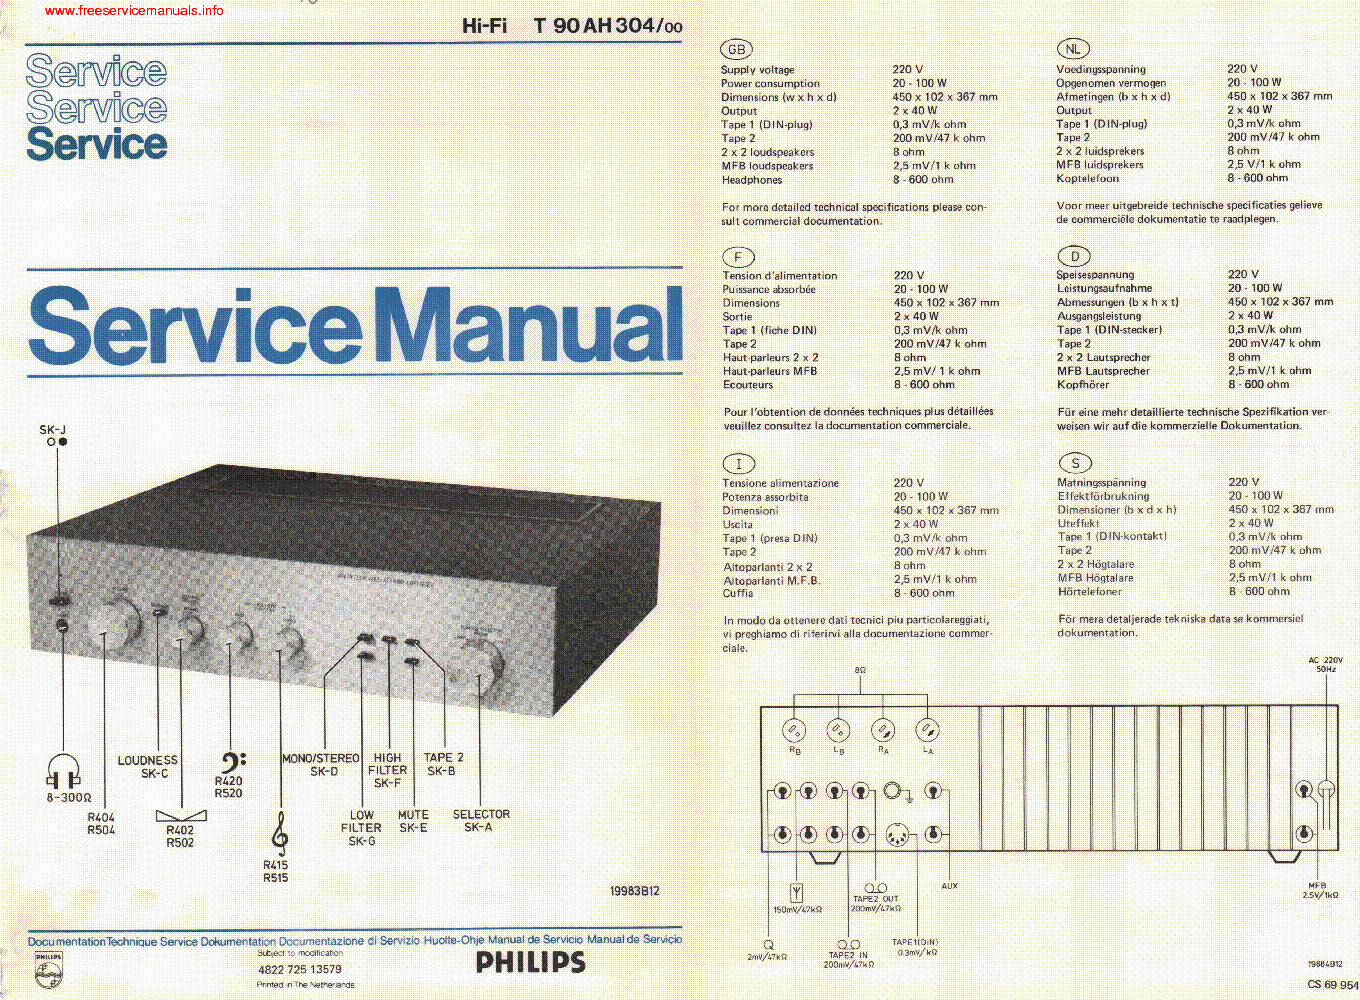 PHILIPS 90AH304 SM service manual (1st page)